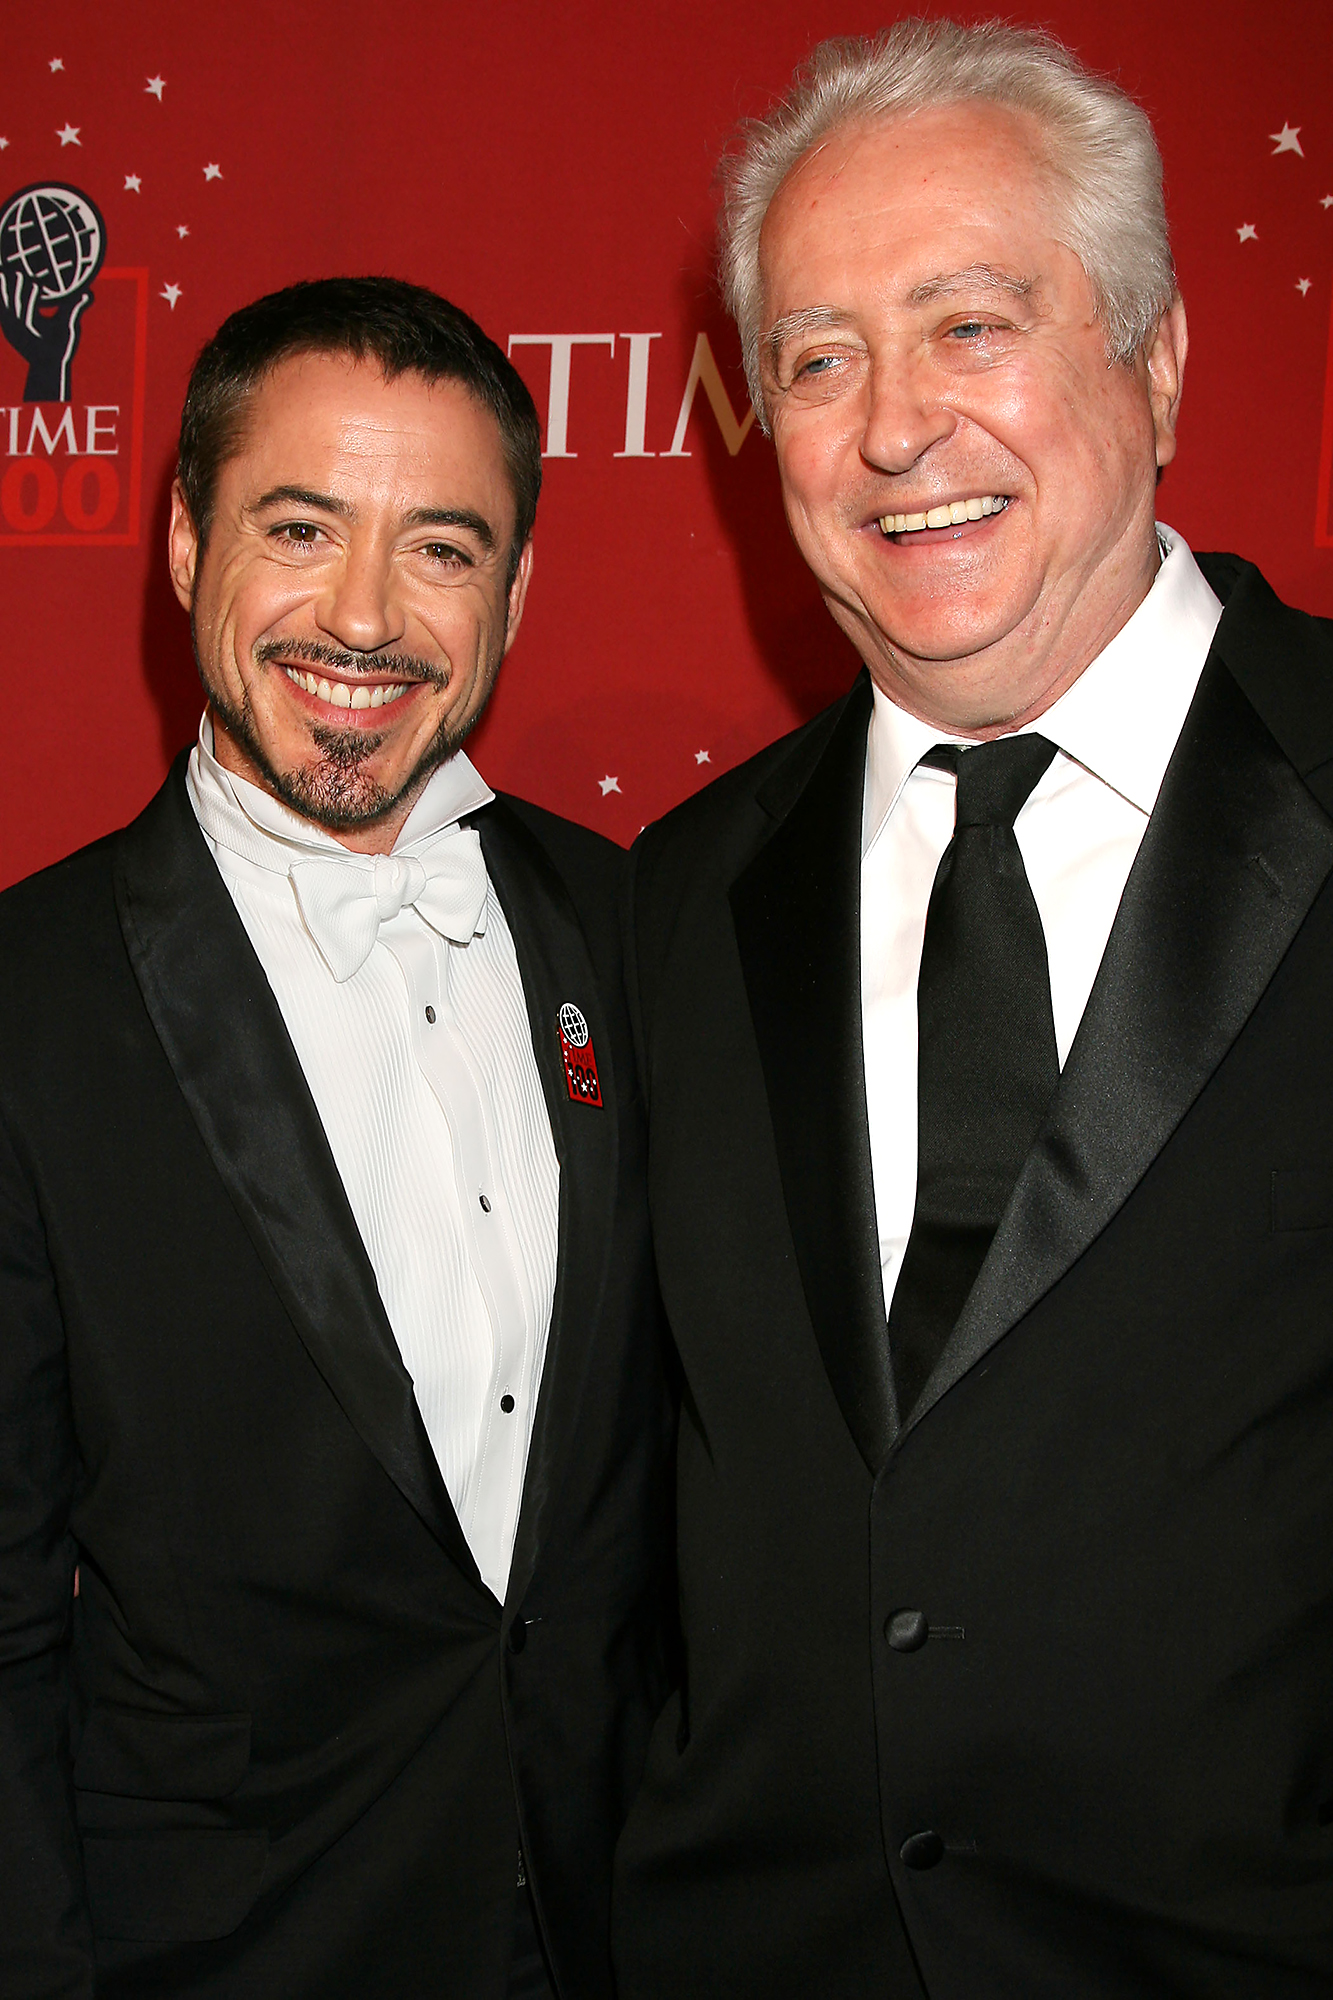 Robert Downey Sr. Dead at 85: Read Robert Downey Jr.’s Tribute to His Dad